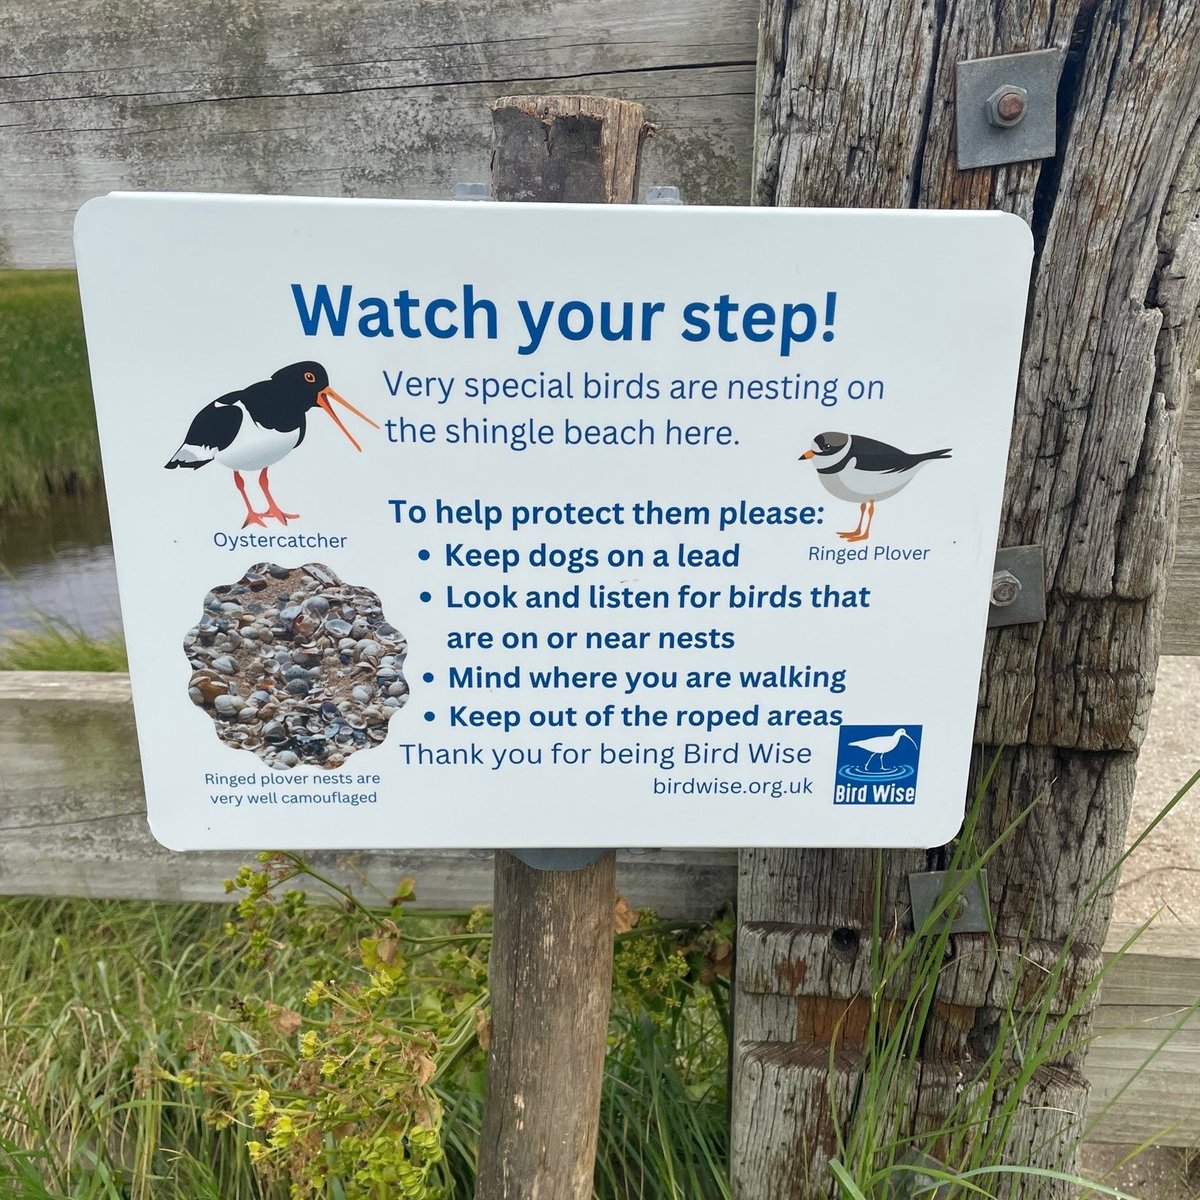 If you're heading to the beach to enjoy the sunshine this weekend please help our birds
Follow requests on signs, keep off areas that are roped off and watch out for nest and chicks on shingle beaches🐥Thank you🙏
#birdwise #shareourshores #coast #kent #weekend #sunshine